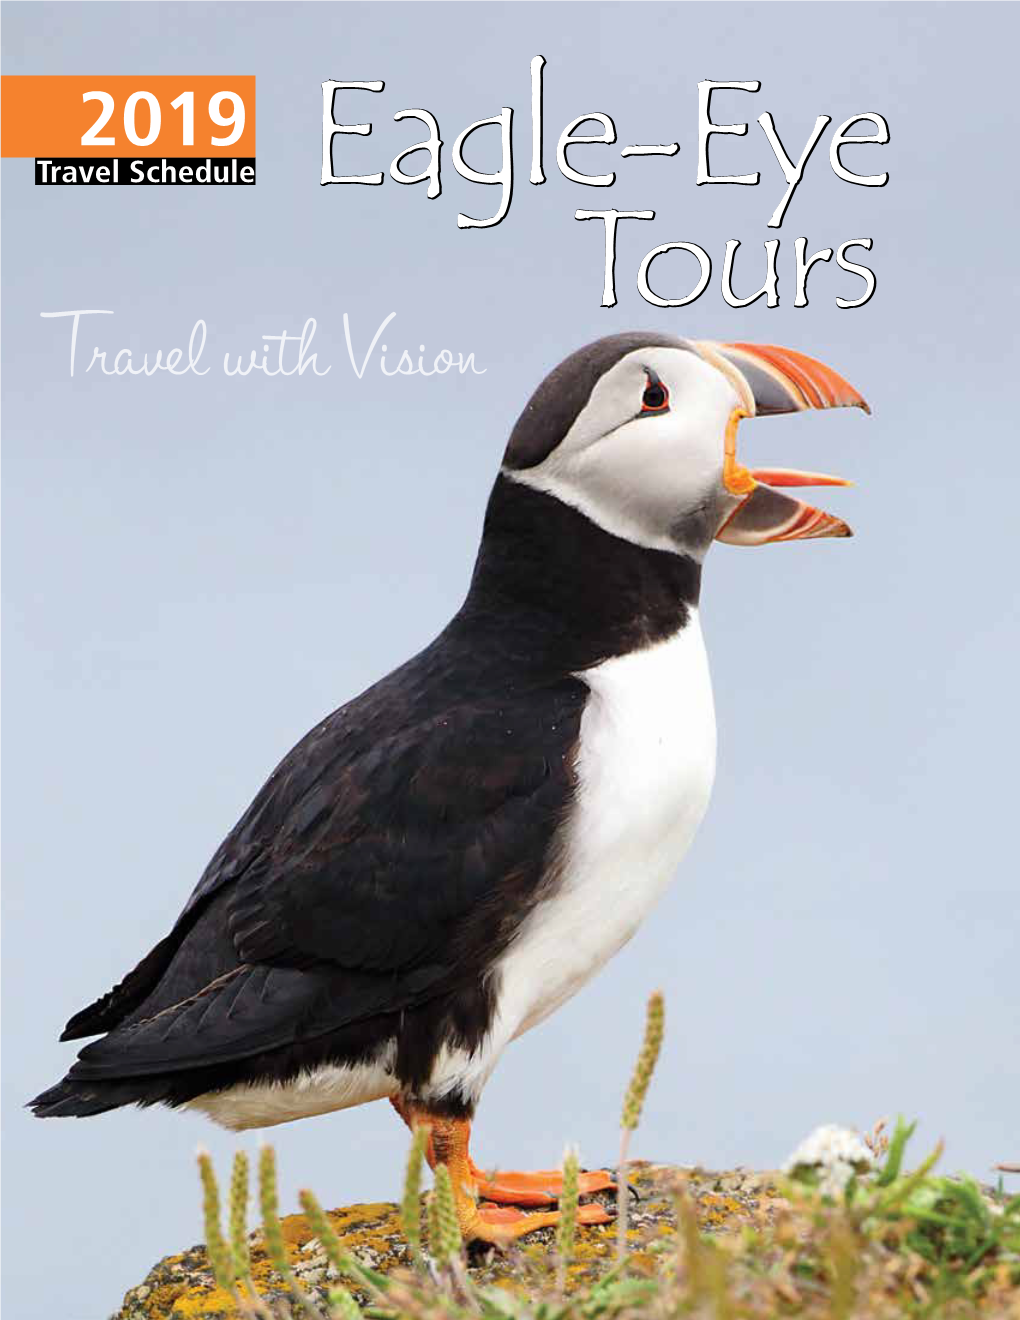 Travel Schedule Eagle-Eye Tours Travel with Vision ABOUT EAGLE-EYE TOURS TOURS by REGION